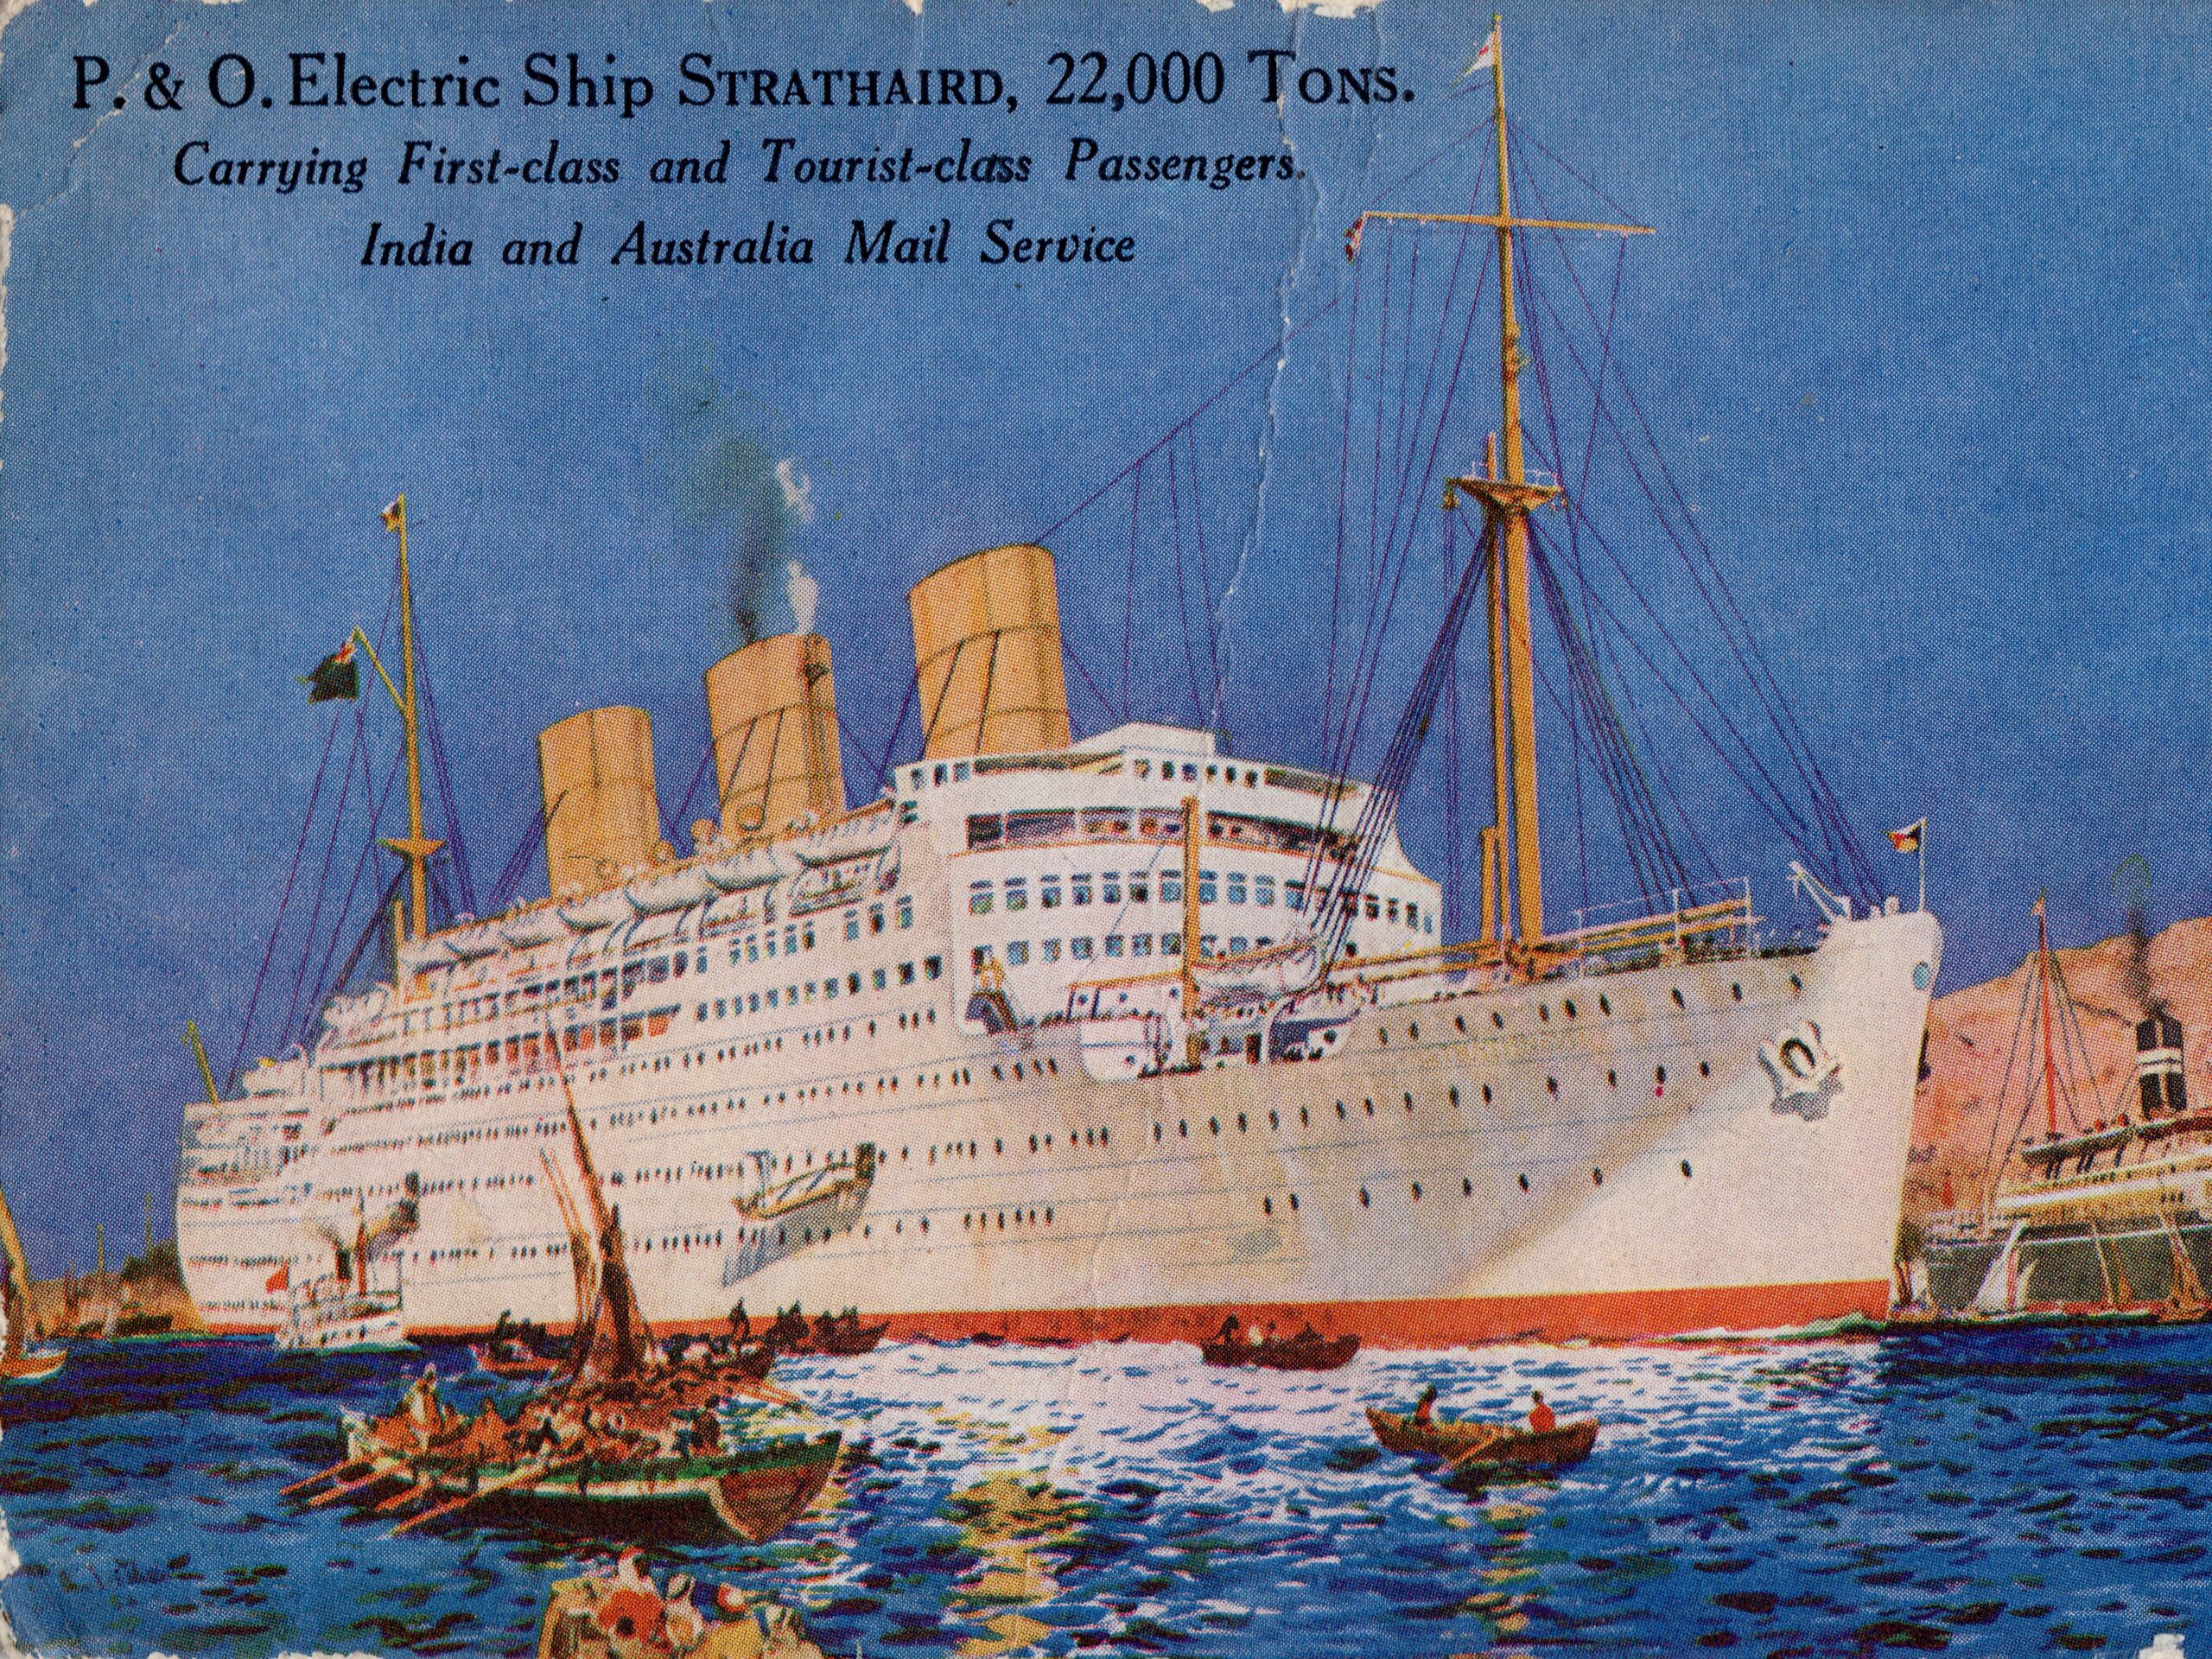 P. &amp; O. Electric Ship Strathaird, 22,000 Tons, 1932.